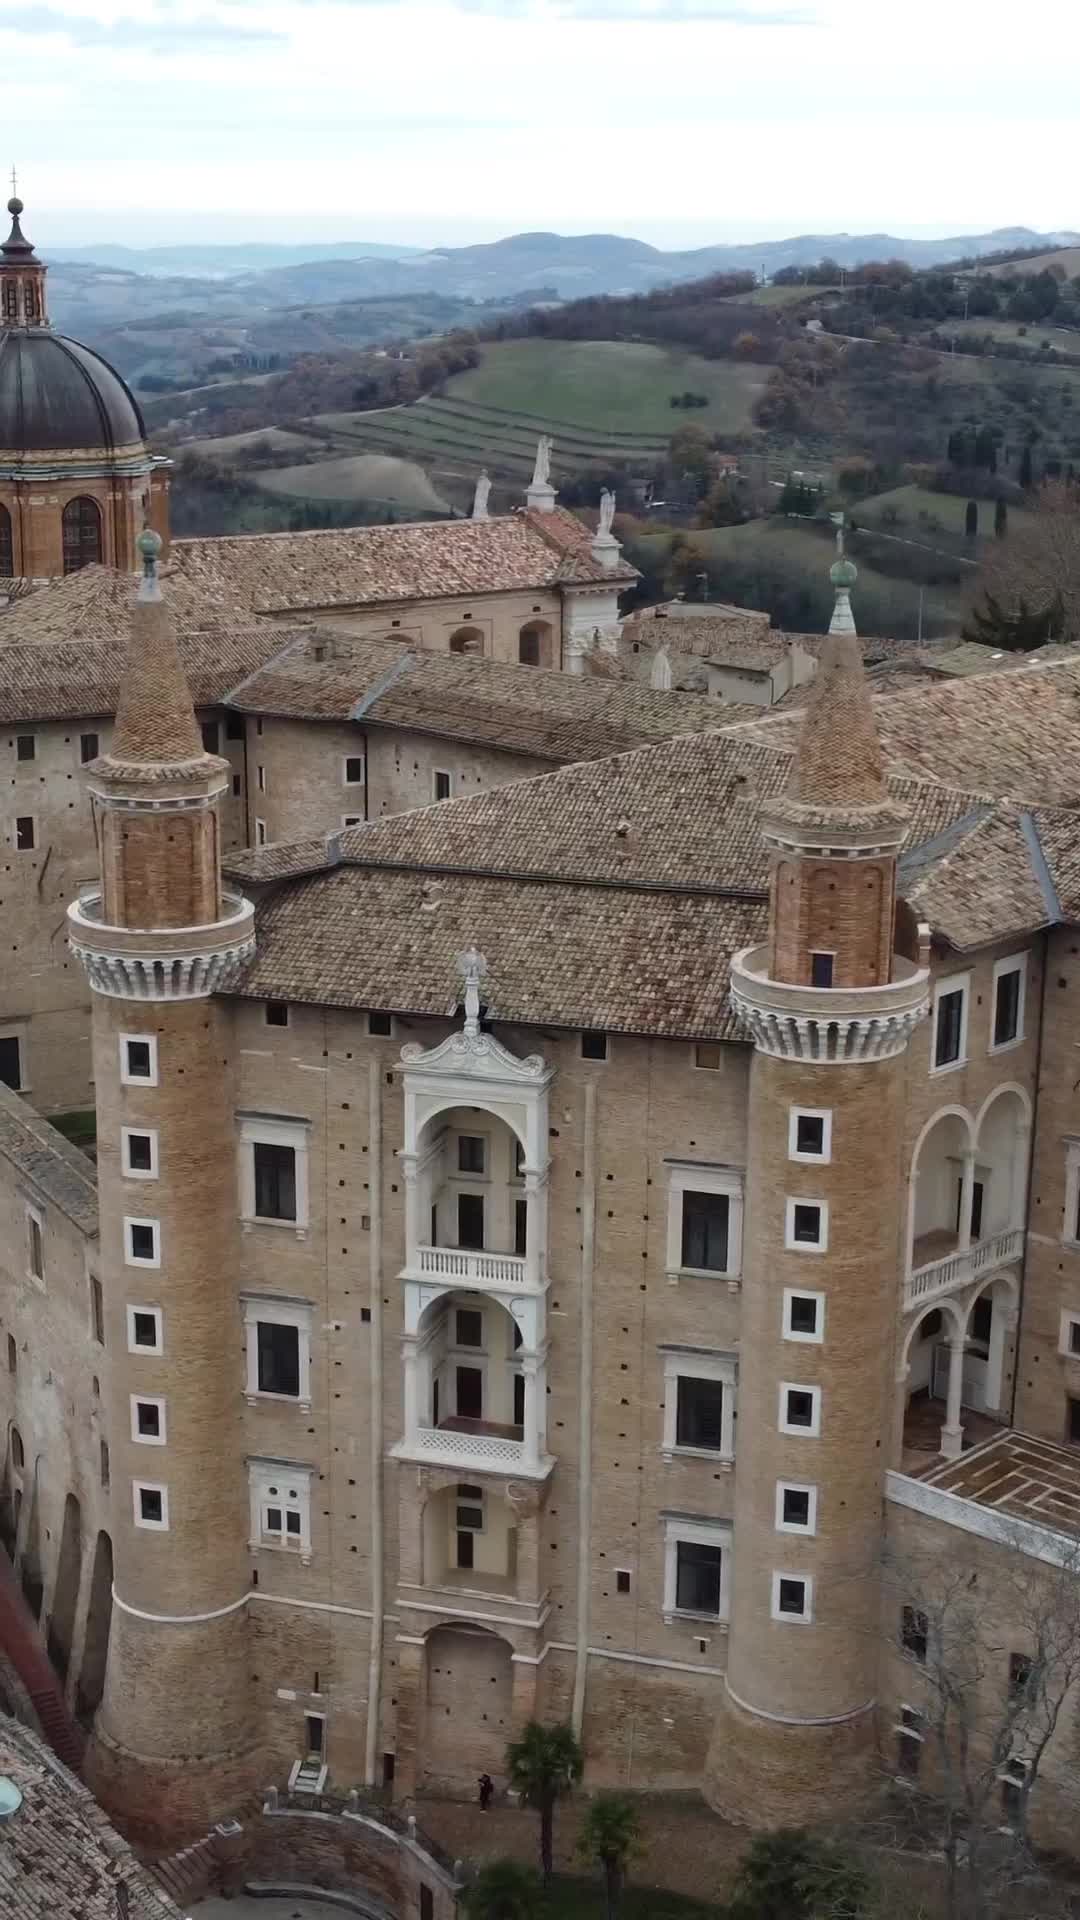 Urbino Ducal Palace: Renaissance Marvel in Marche